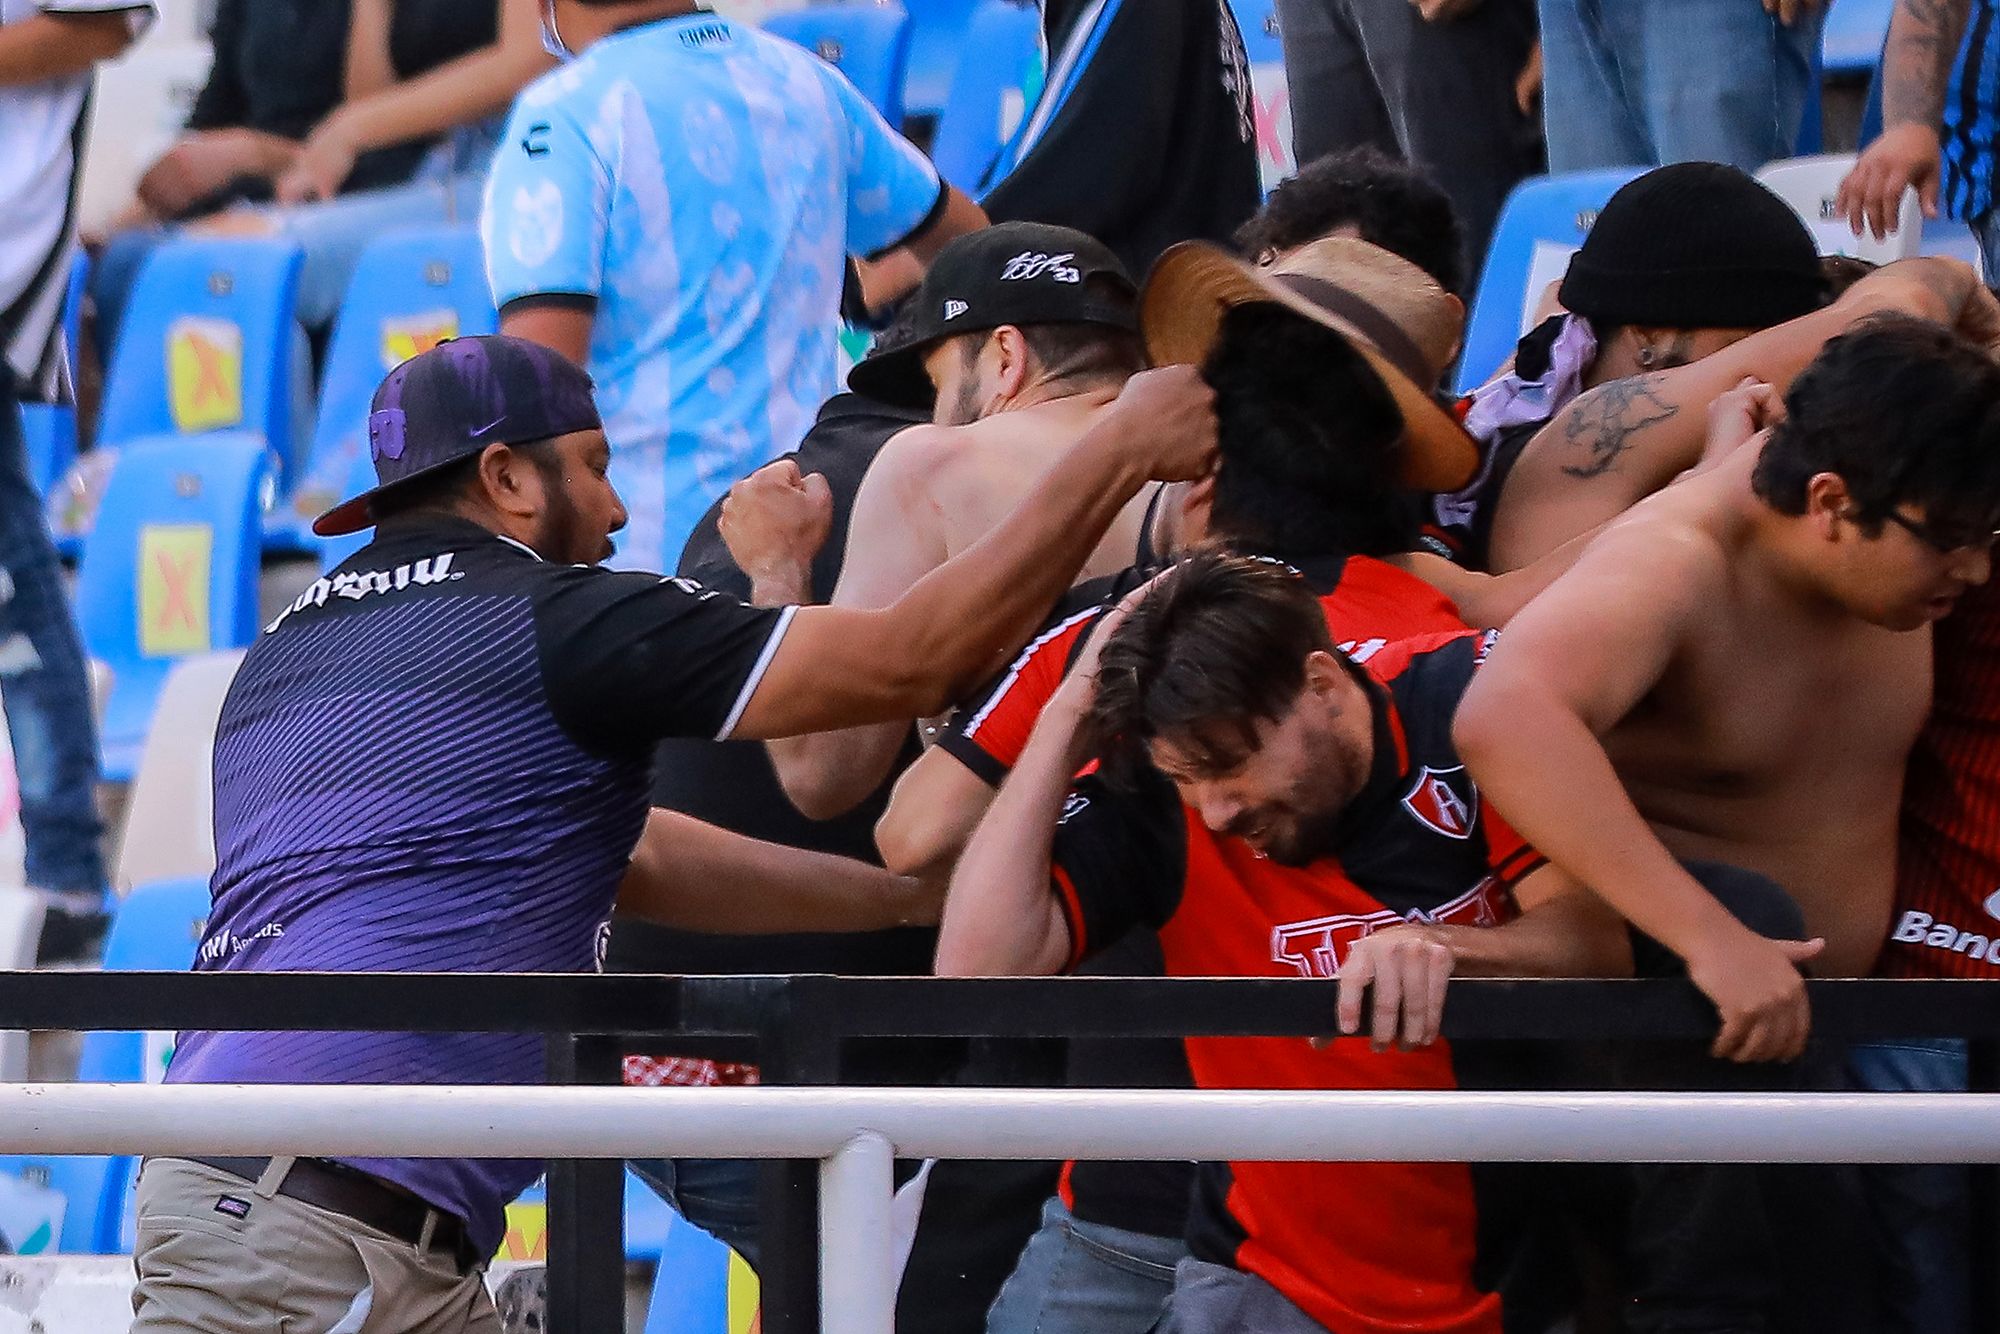 Mexican soccer game brawl: At least 26 injured as fights break out at Liga  MX game between Querétaro and Atlas fans